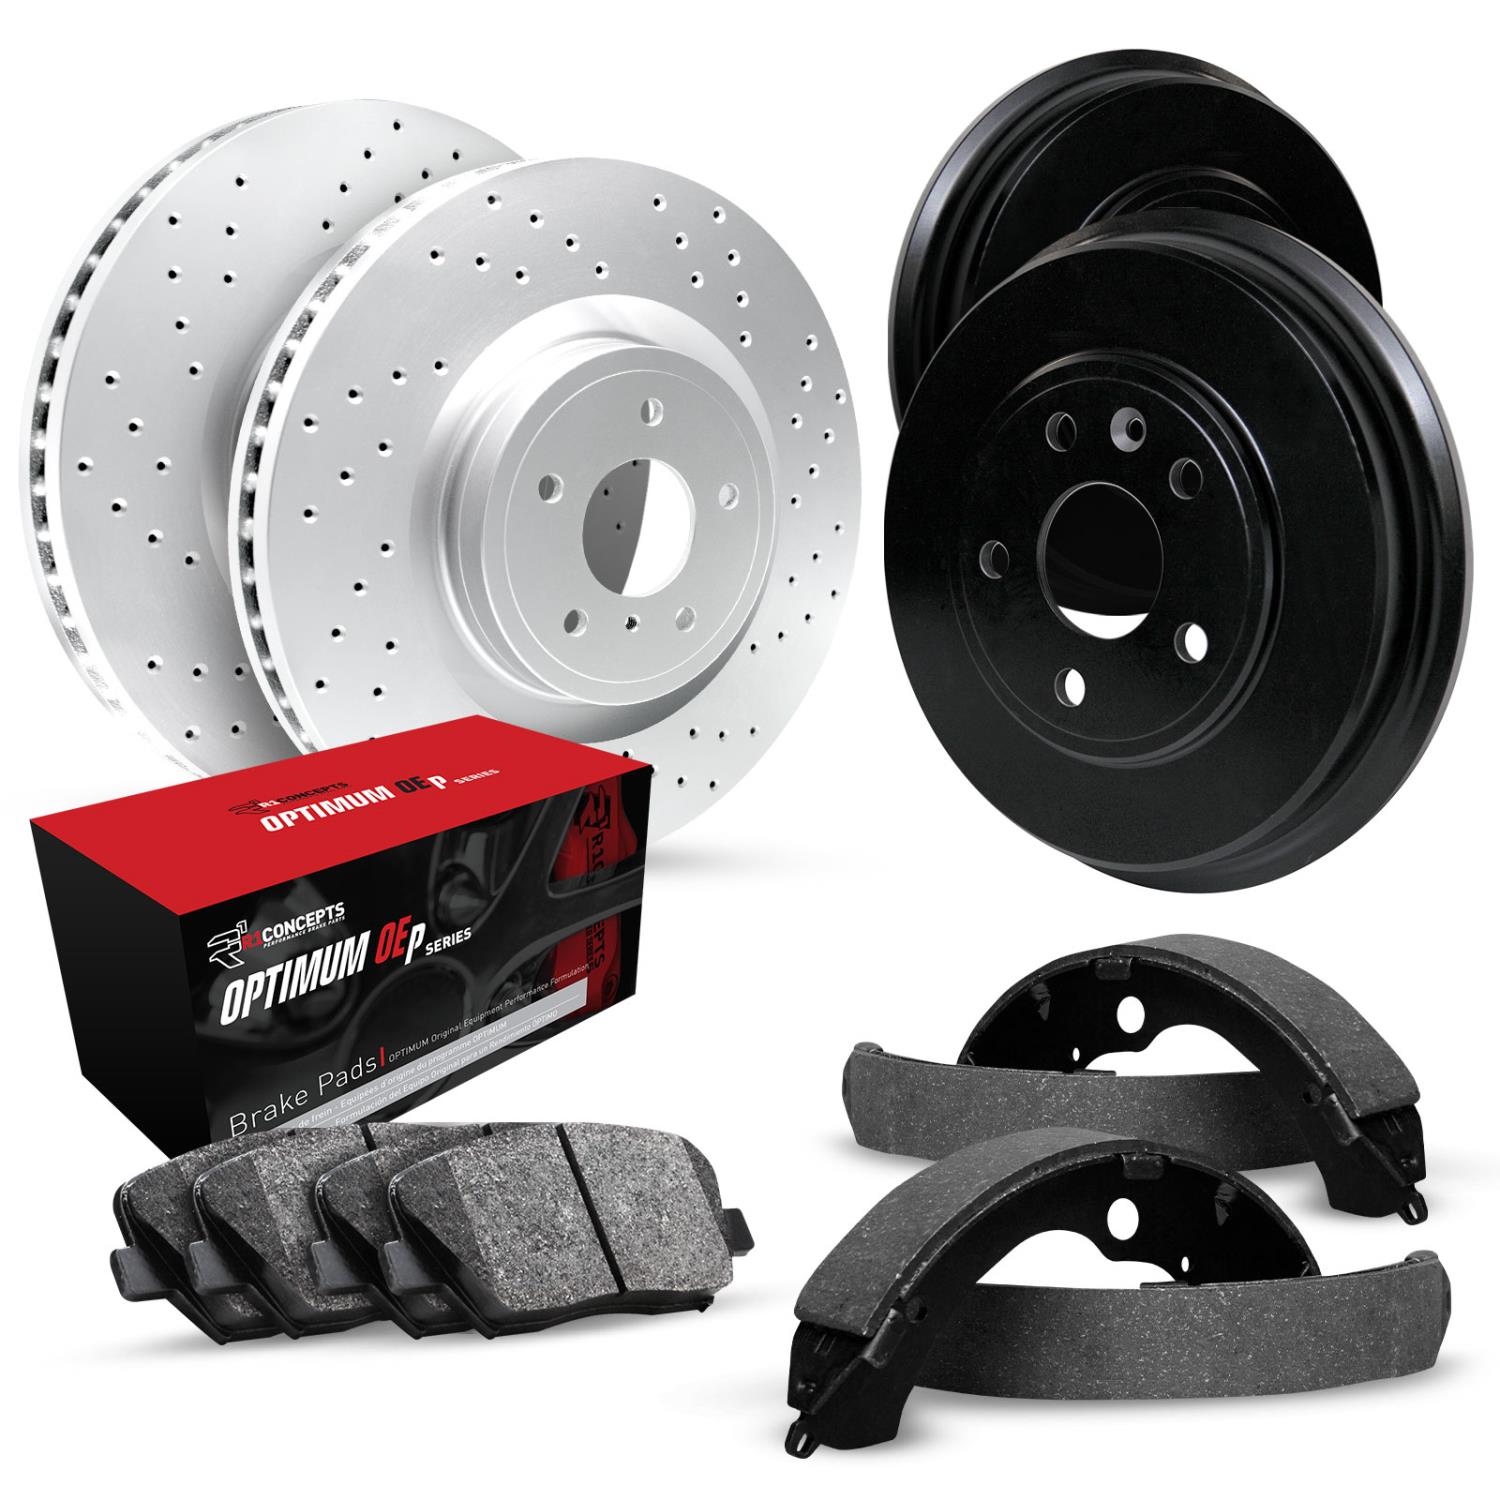 GEO-Carbon Drilled Brake Rotor & Drum Set w/Optimum OE Pads & Shoes, 1992-1993 GM, Position: Front & Rear